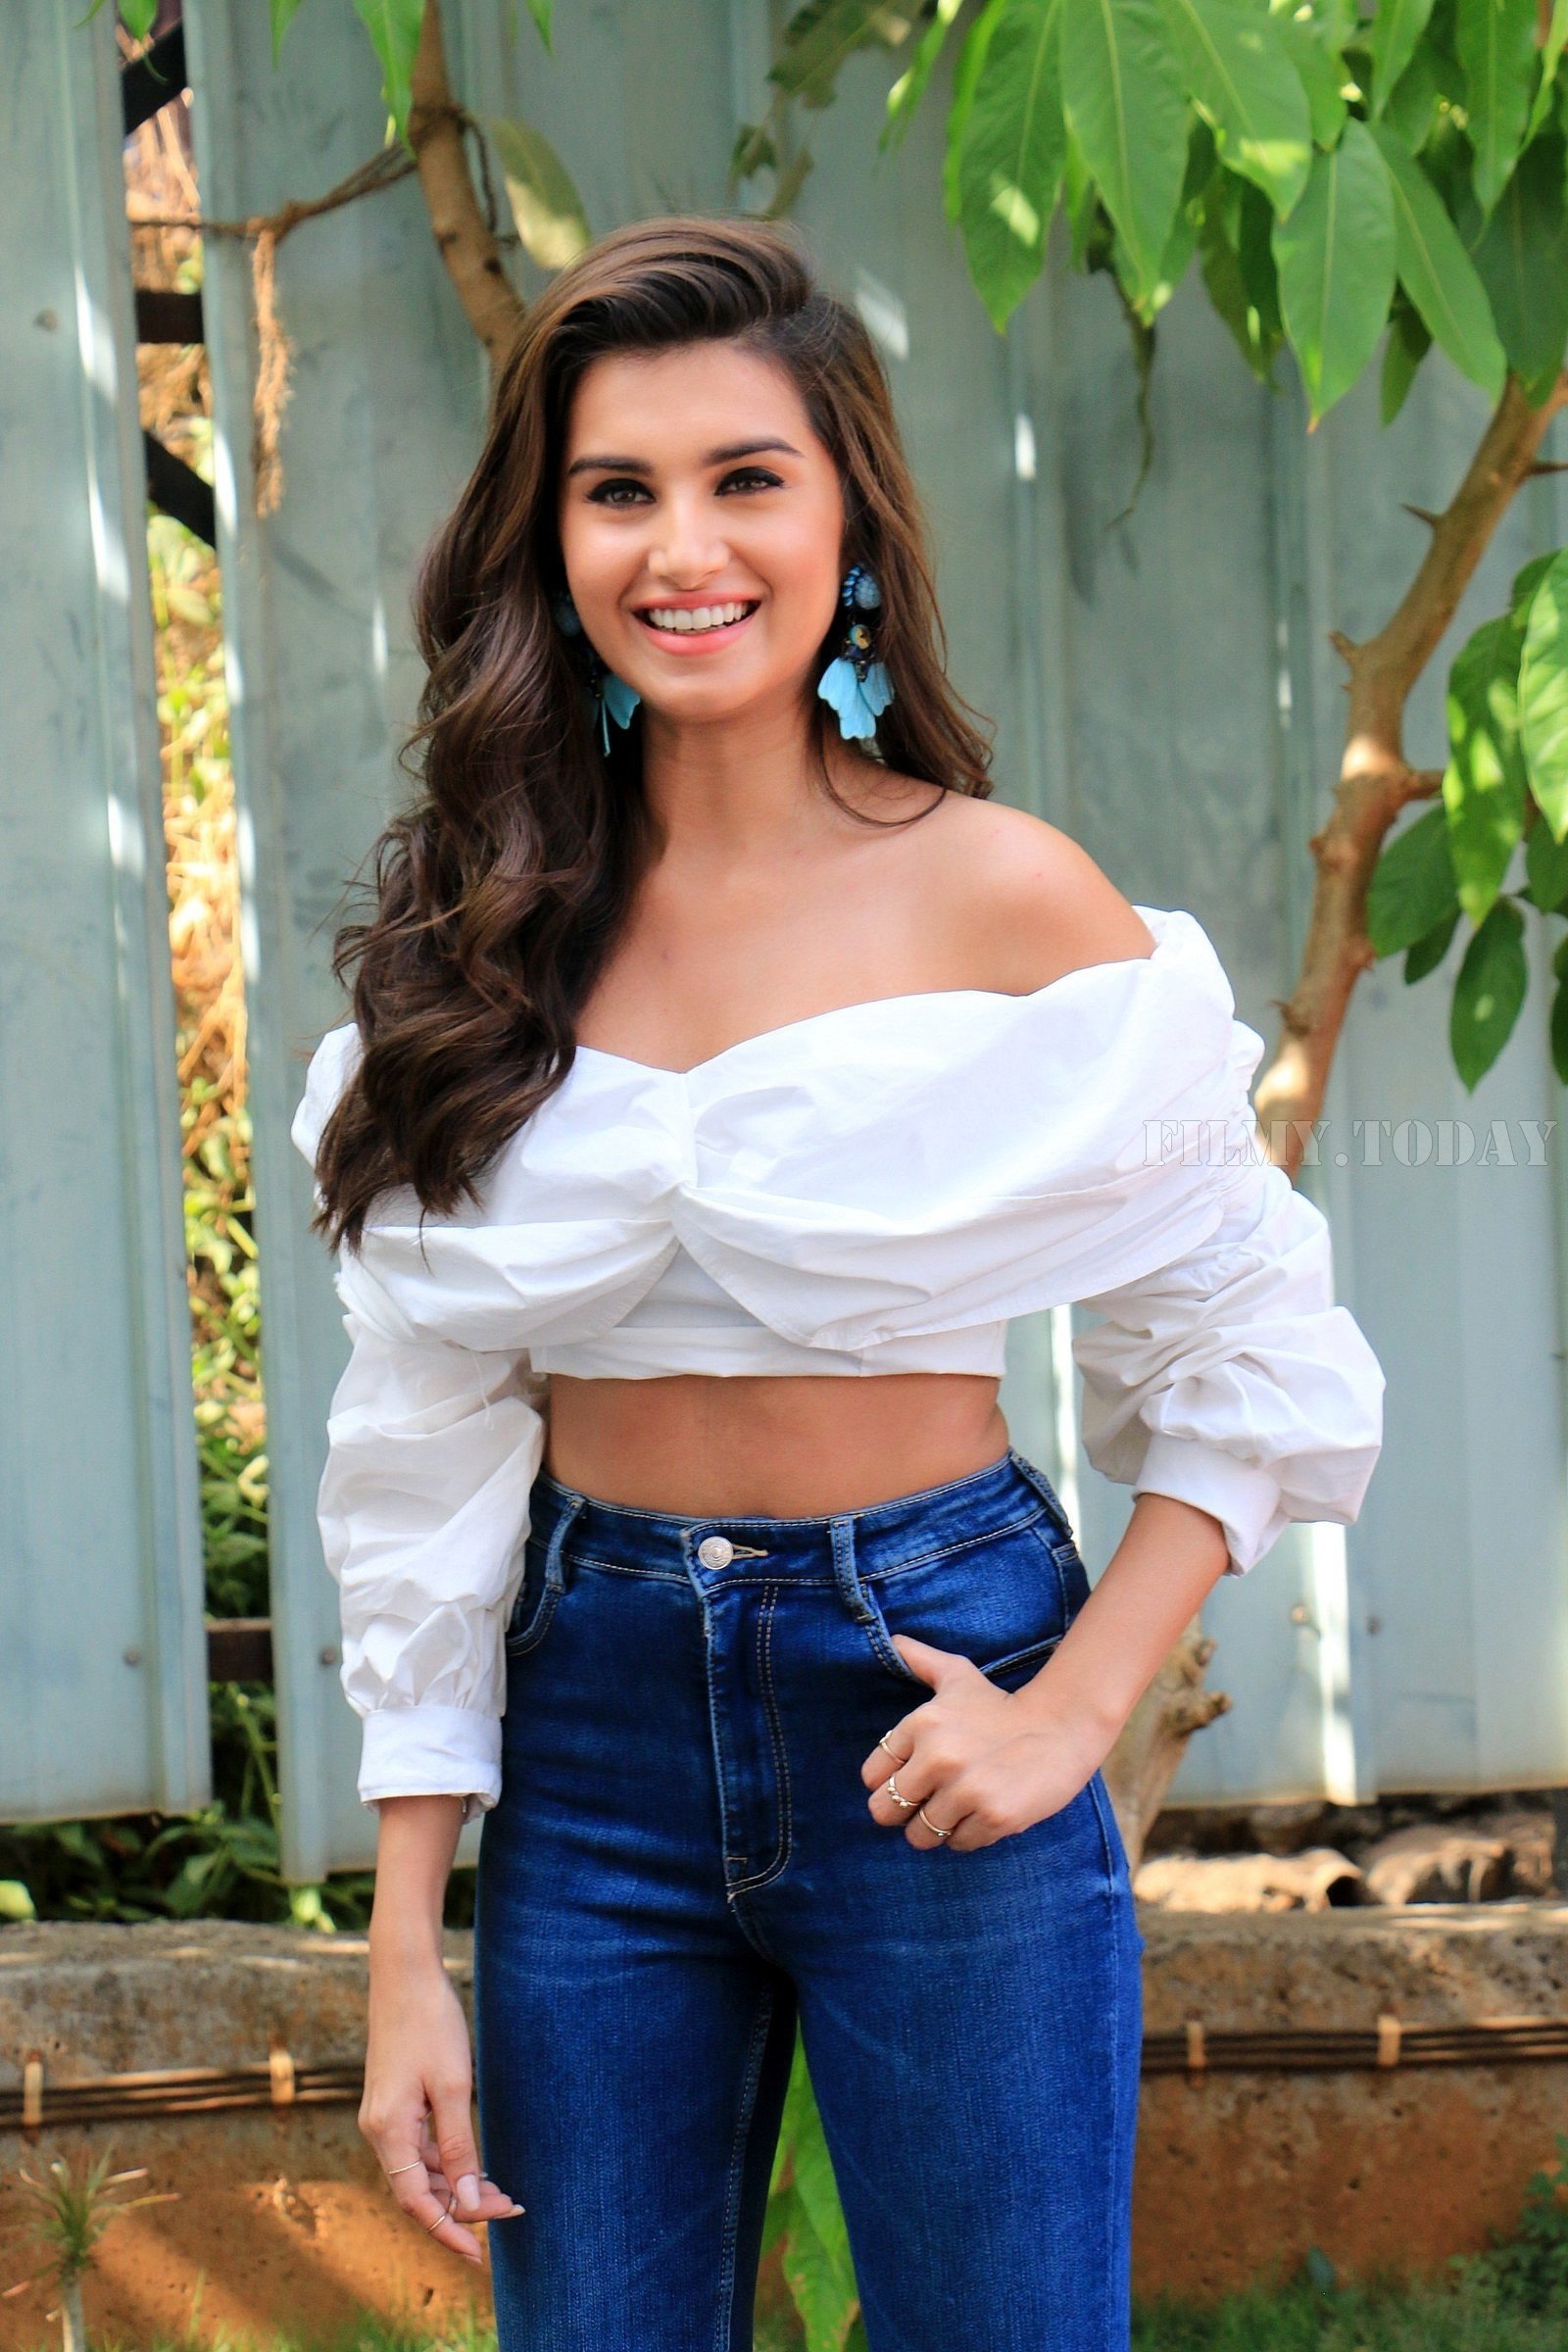 Tara Sutaria - Photos: Promotion Of Student Of The year 2 on the sets of Super Dancer Chapter 3 | Picture 1645537